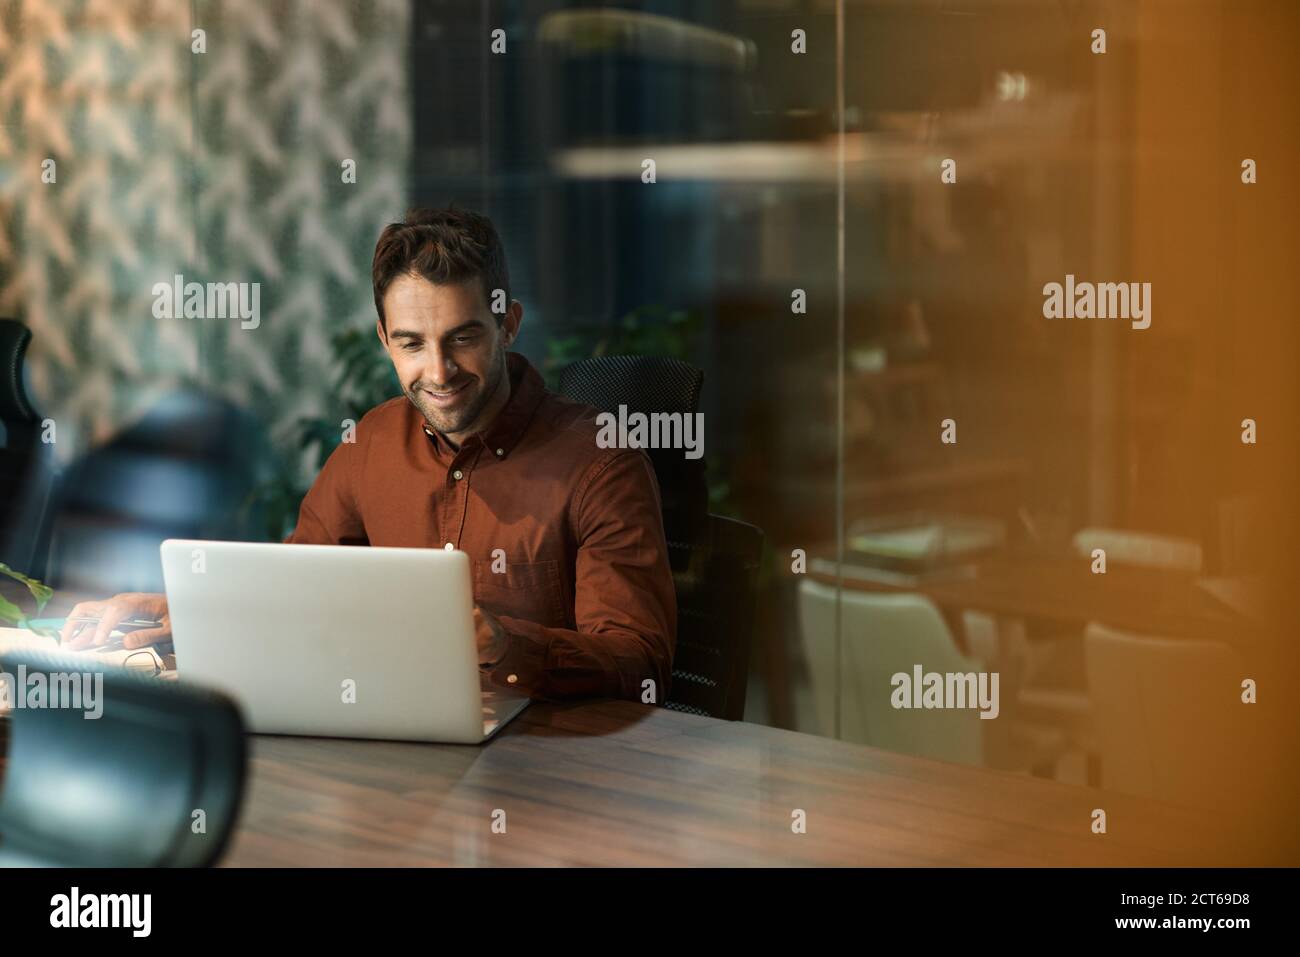 Businessman working on a laptop in an office after hours Stock Photo